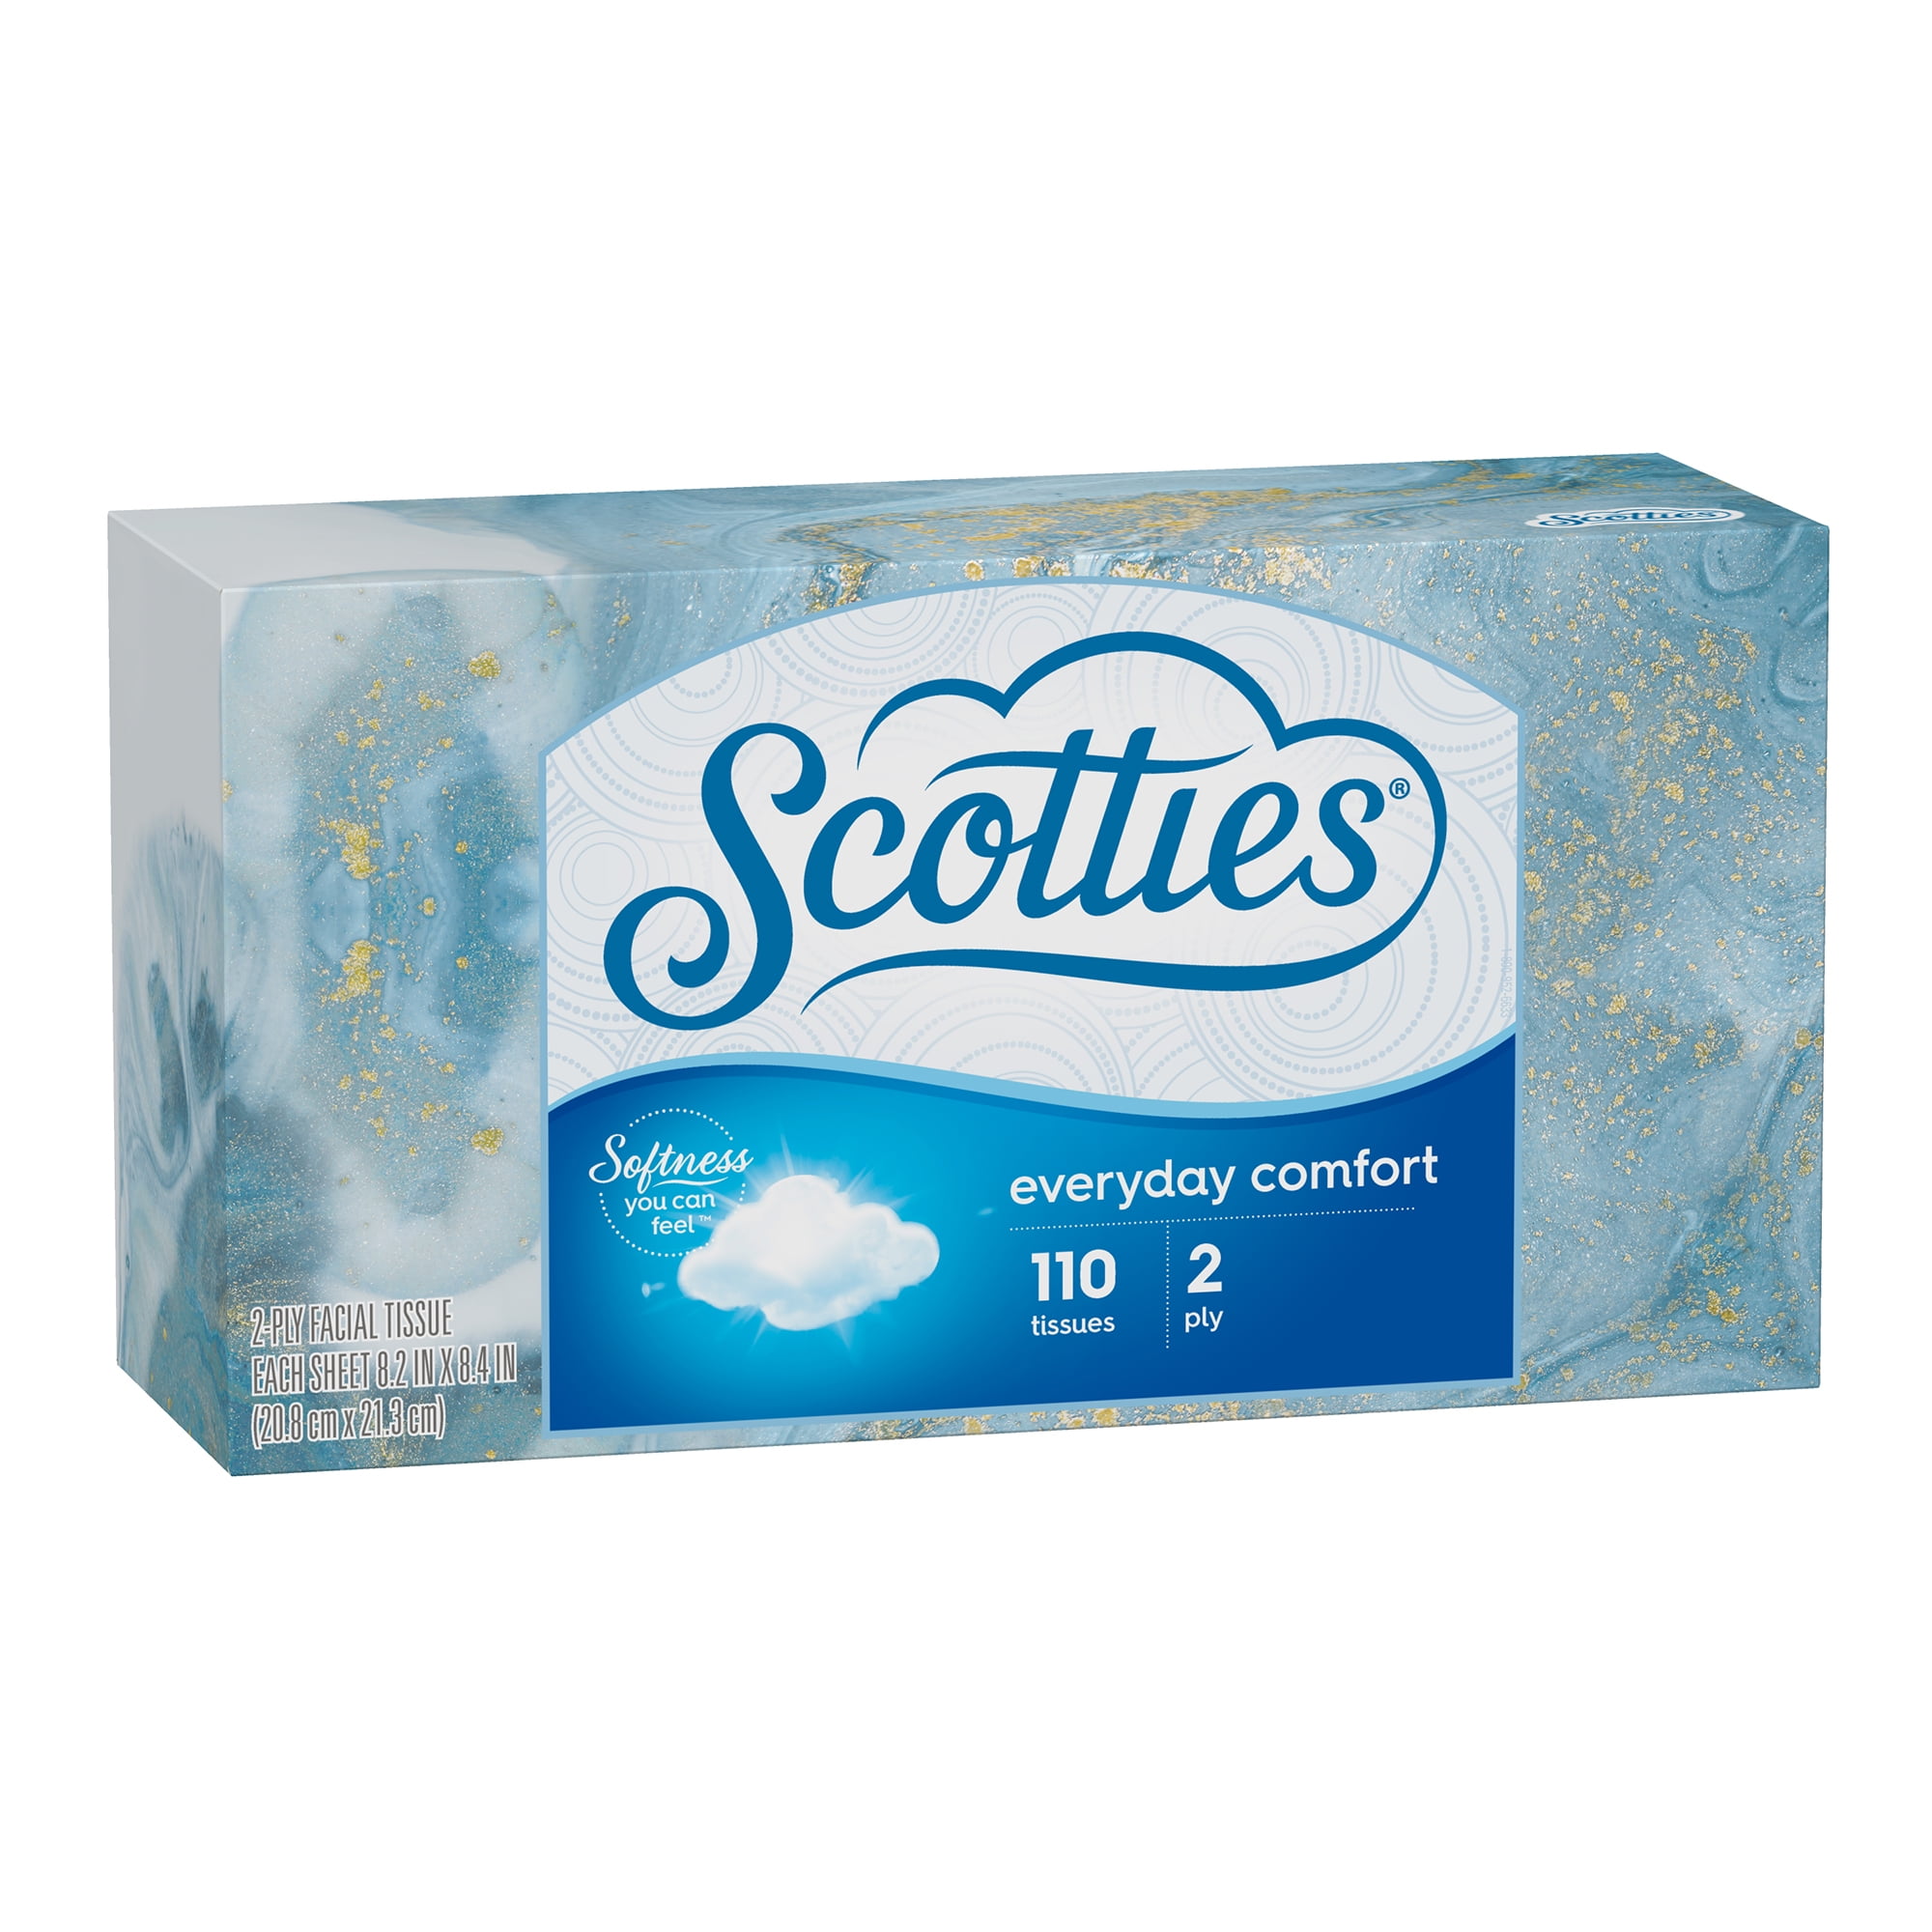 4 boxes Pack of 148 Scotties 2-Ply Facial tissues box 